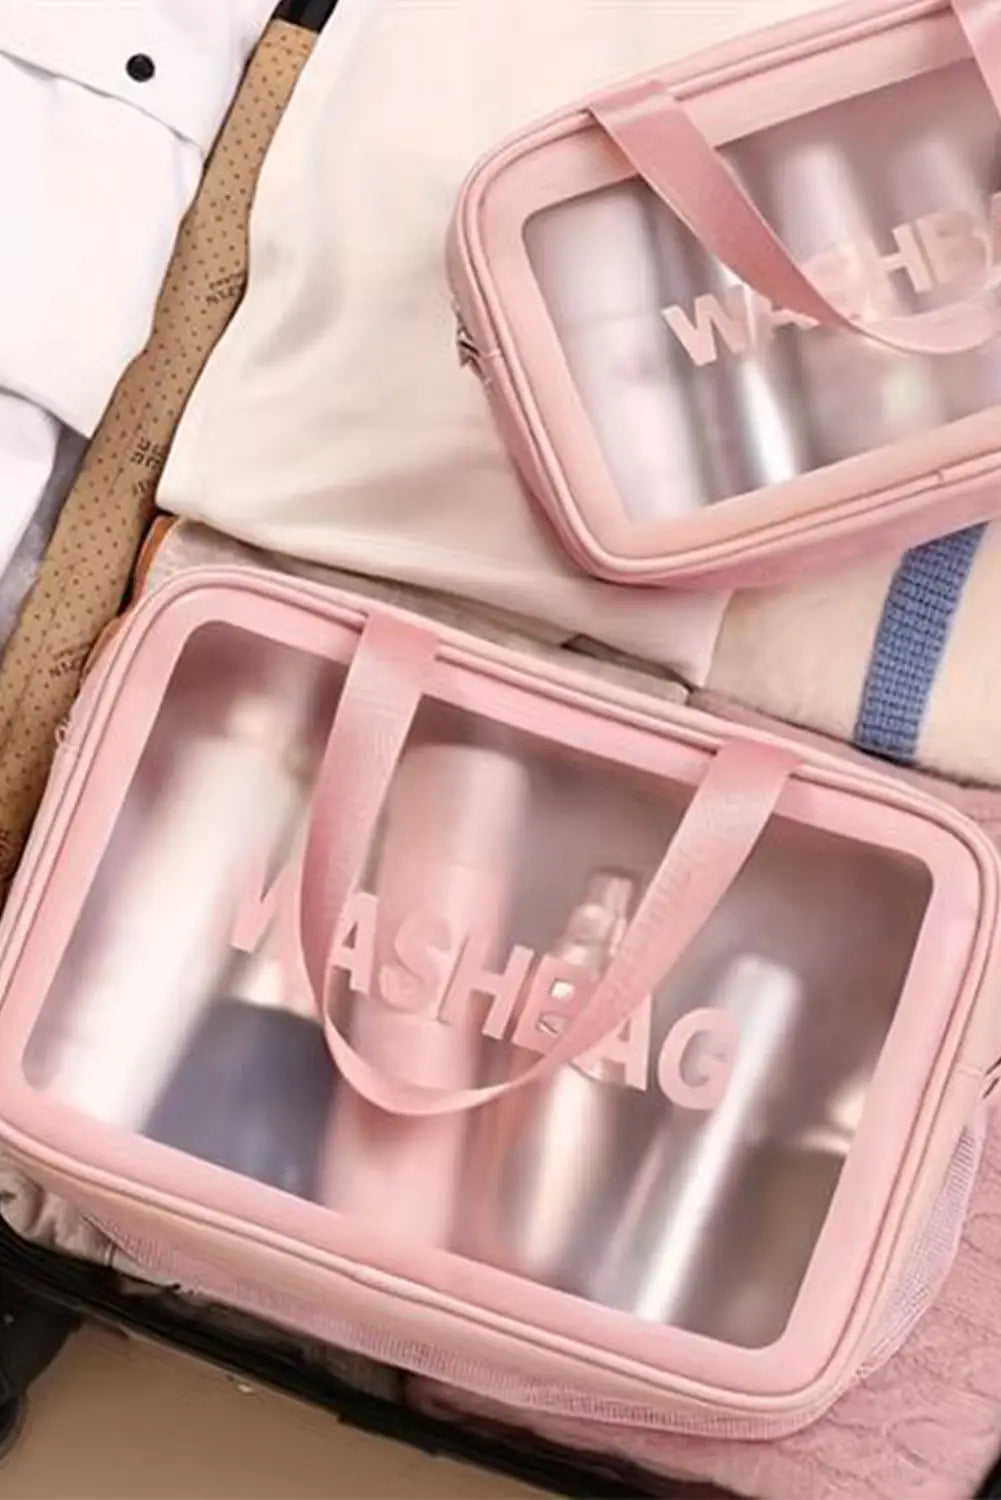 Pink washbag print clear frosted waterproof bag set - one size / 100% abs - travel bags